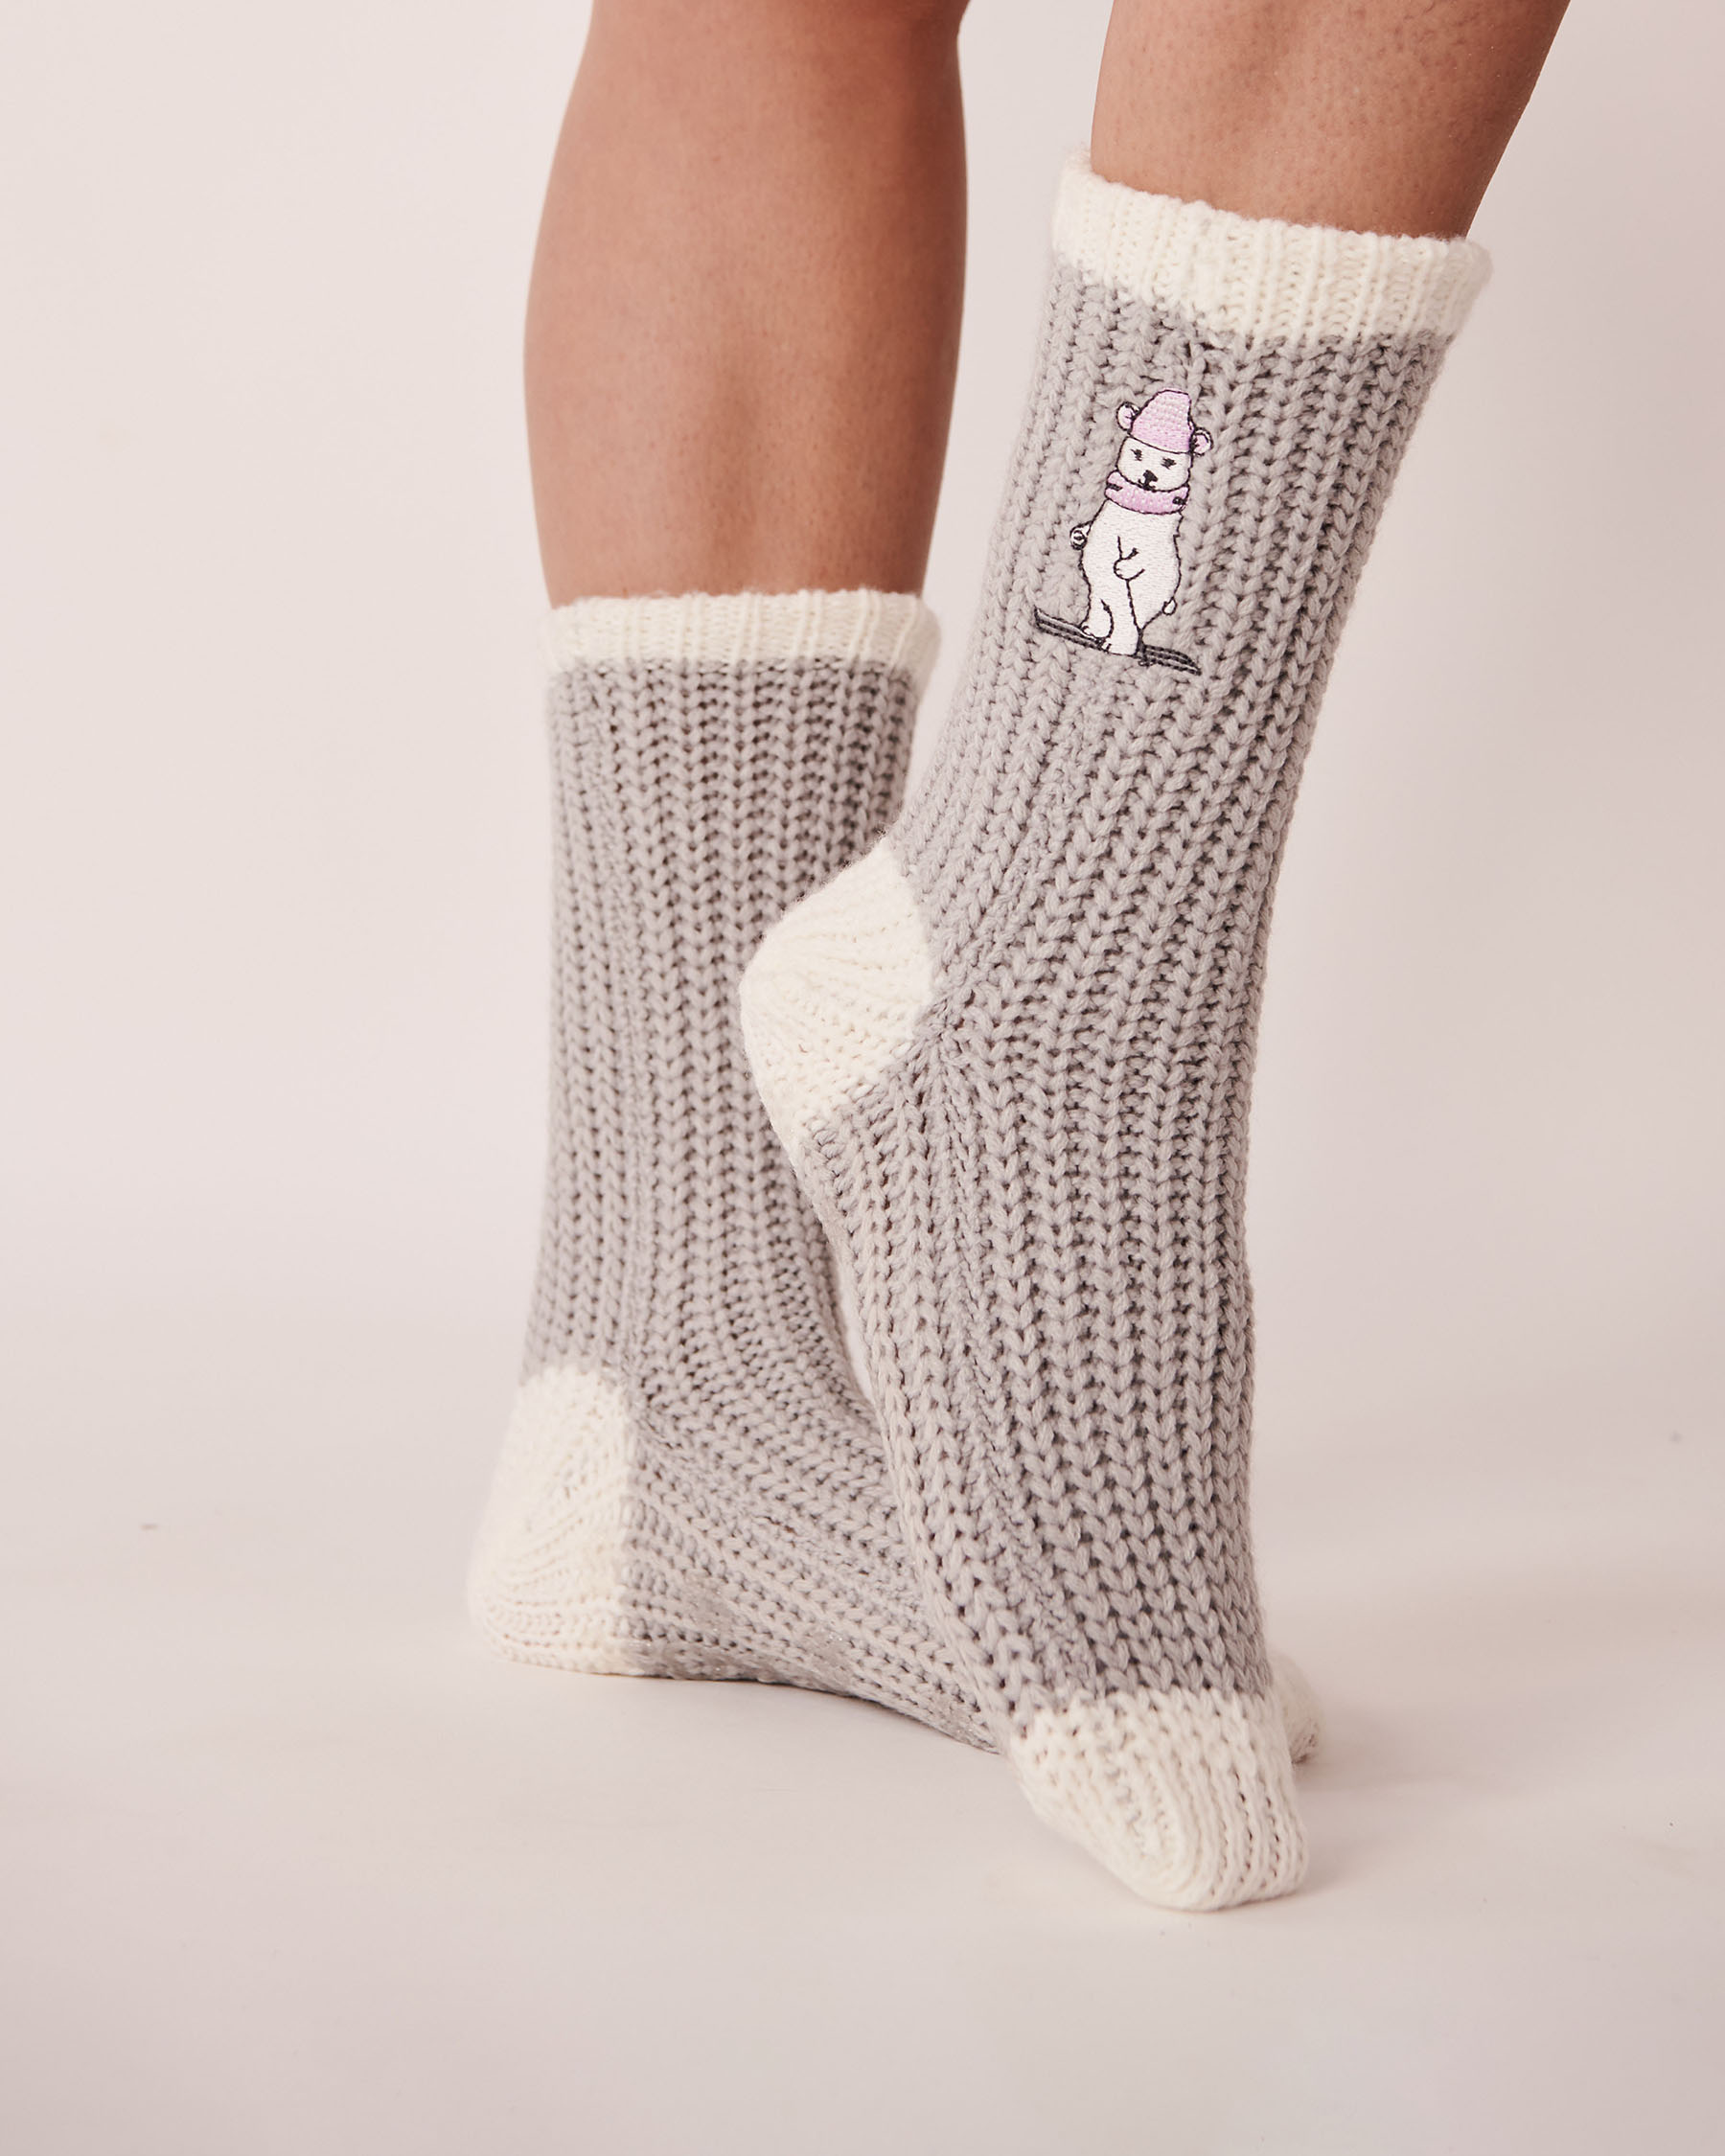 LA VIE EN ROSE Knitted Socks with winter Embroidery Silver grey 40700245 - View1